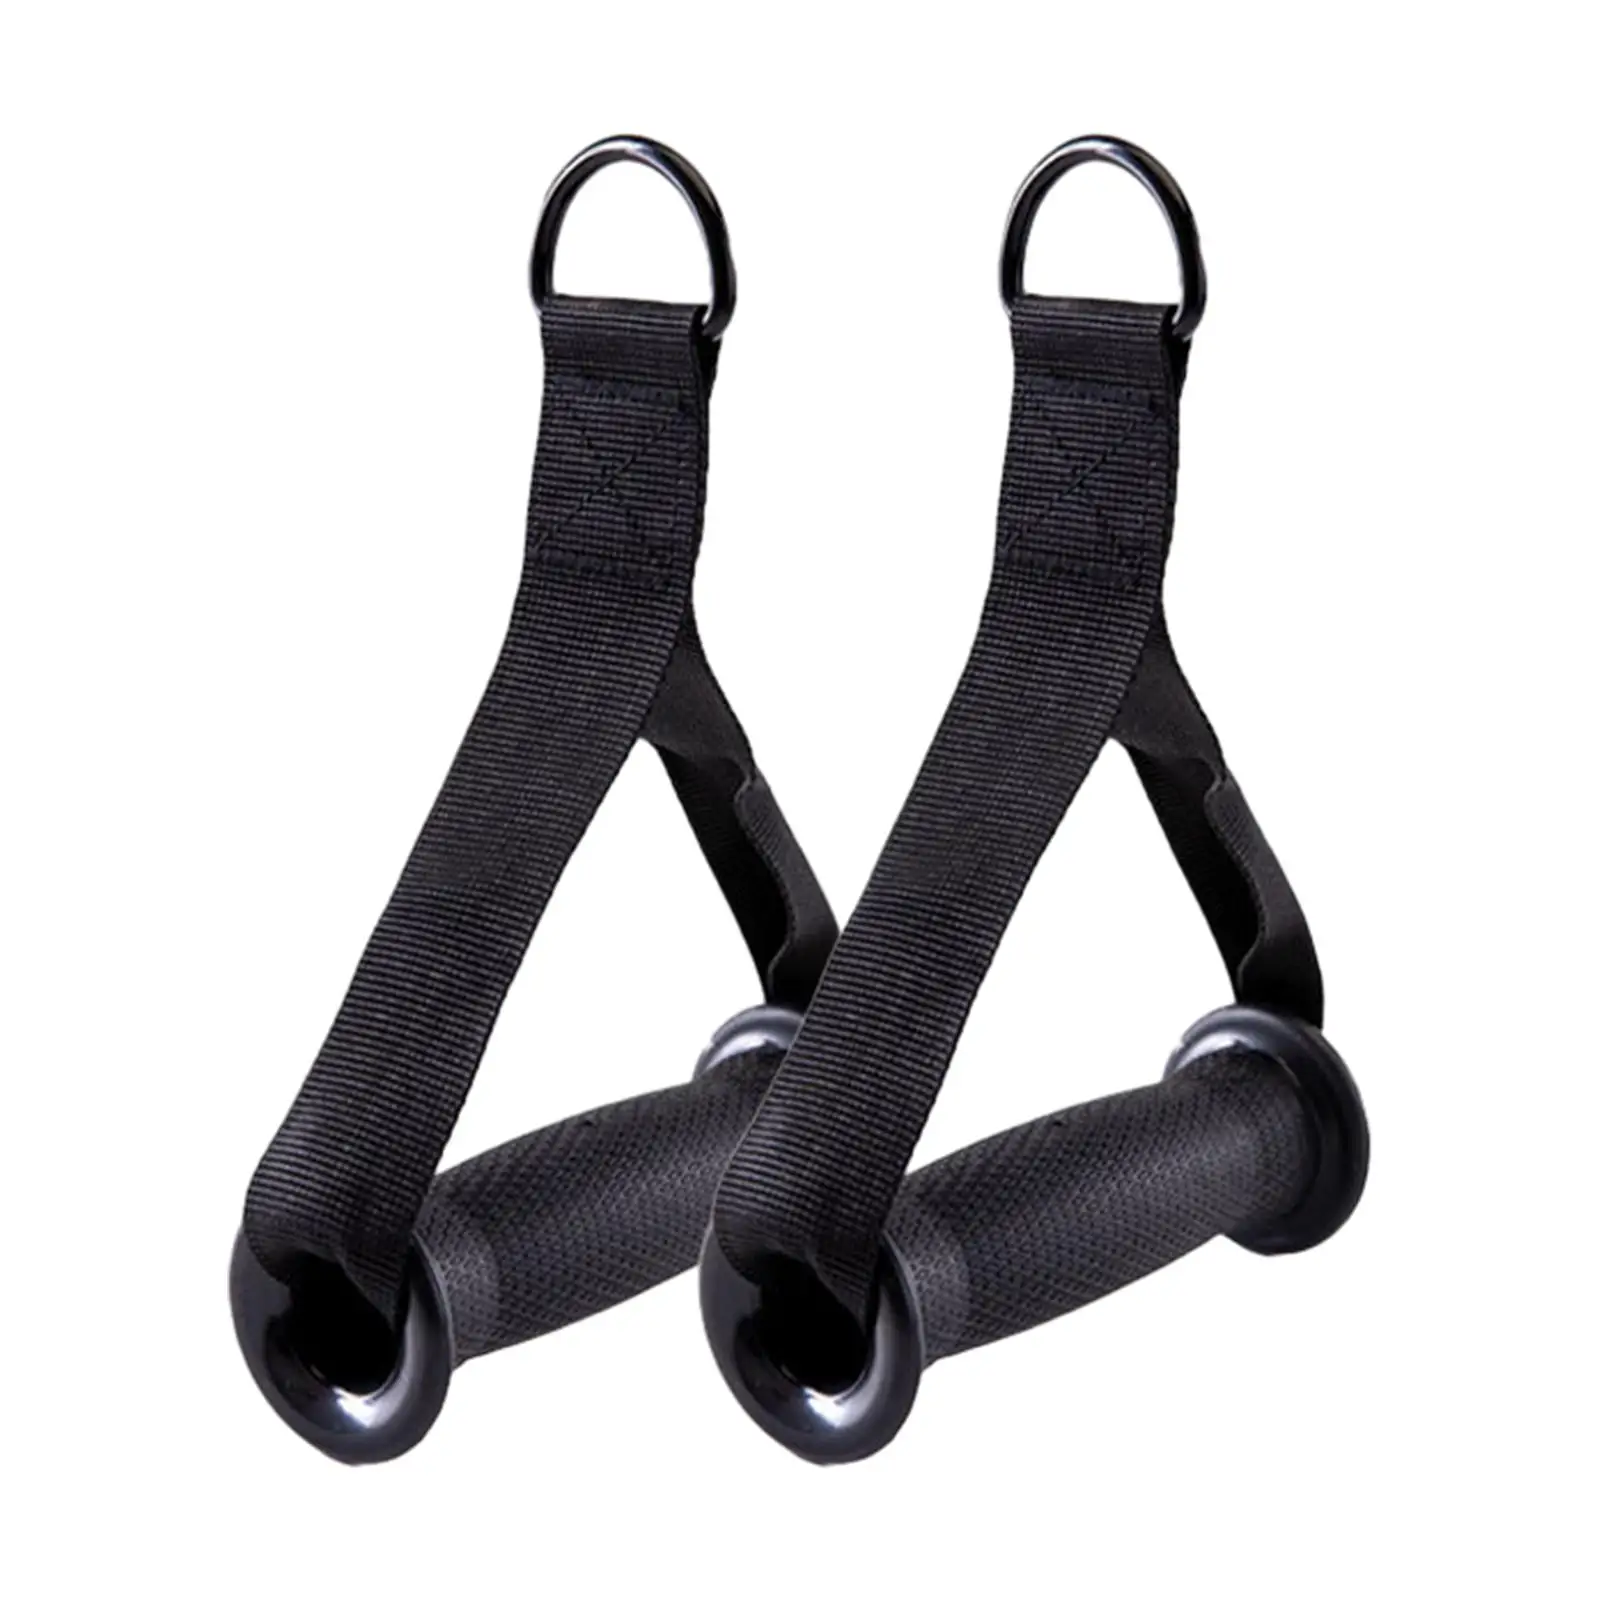 Exercise Handles Machine Attachments Resistance Band Handles for Fitness Equipment Working Out Yoga Pilates Strength Training